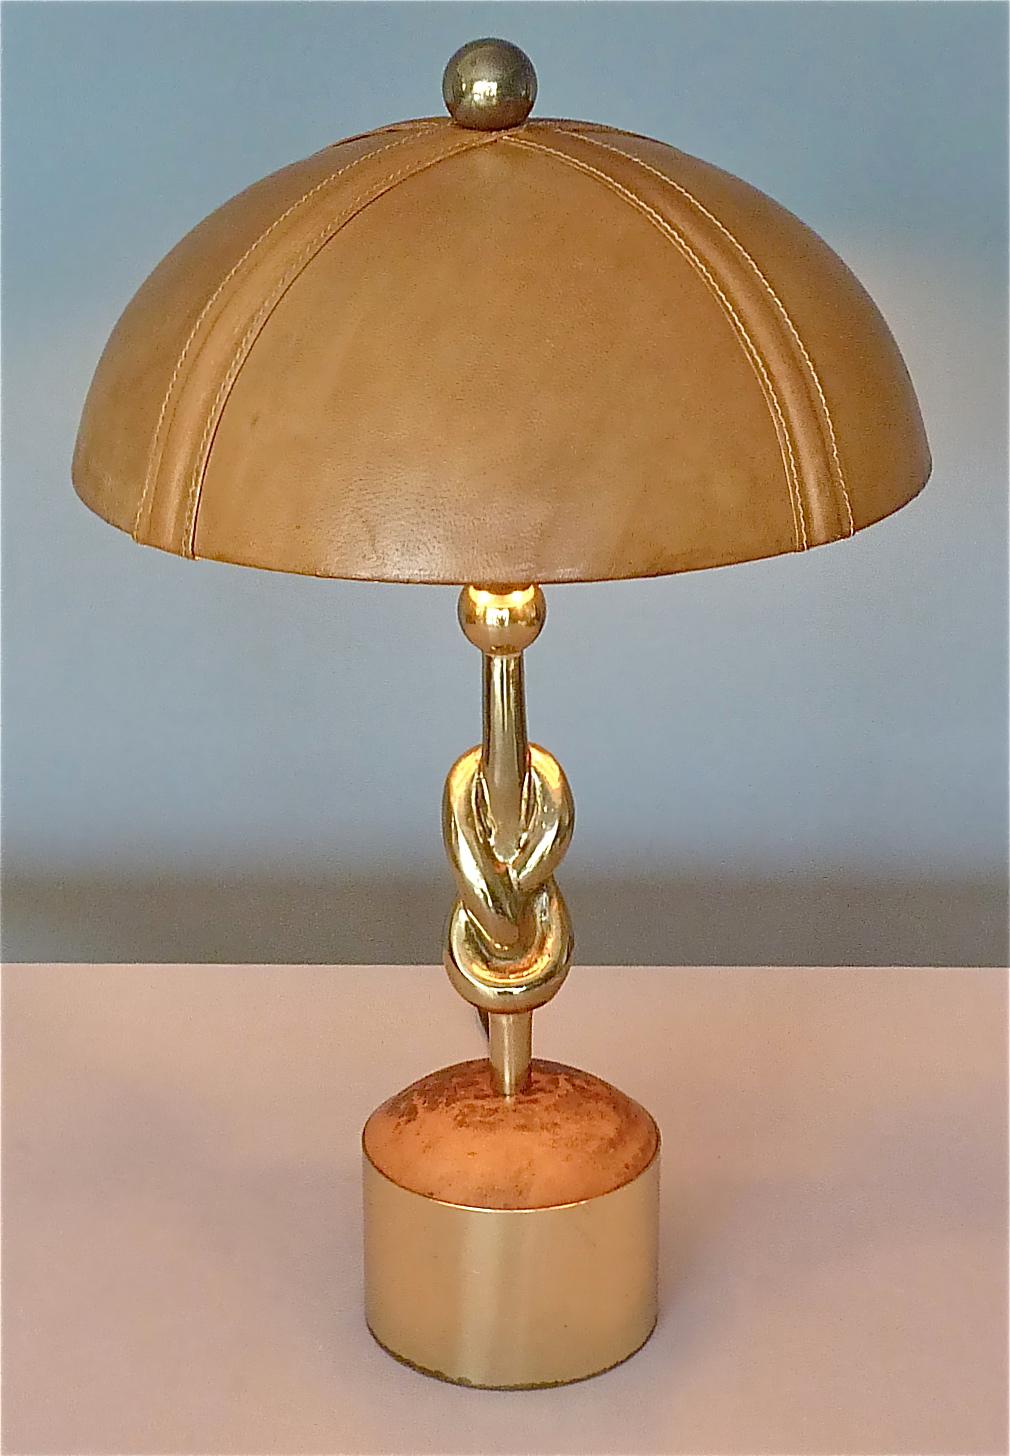 Sculptural Gilt Bronze Leather Knotted Table Lamp French 1970s Jansen Pergay Era For Sale 14